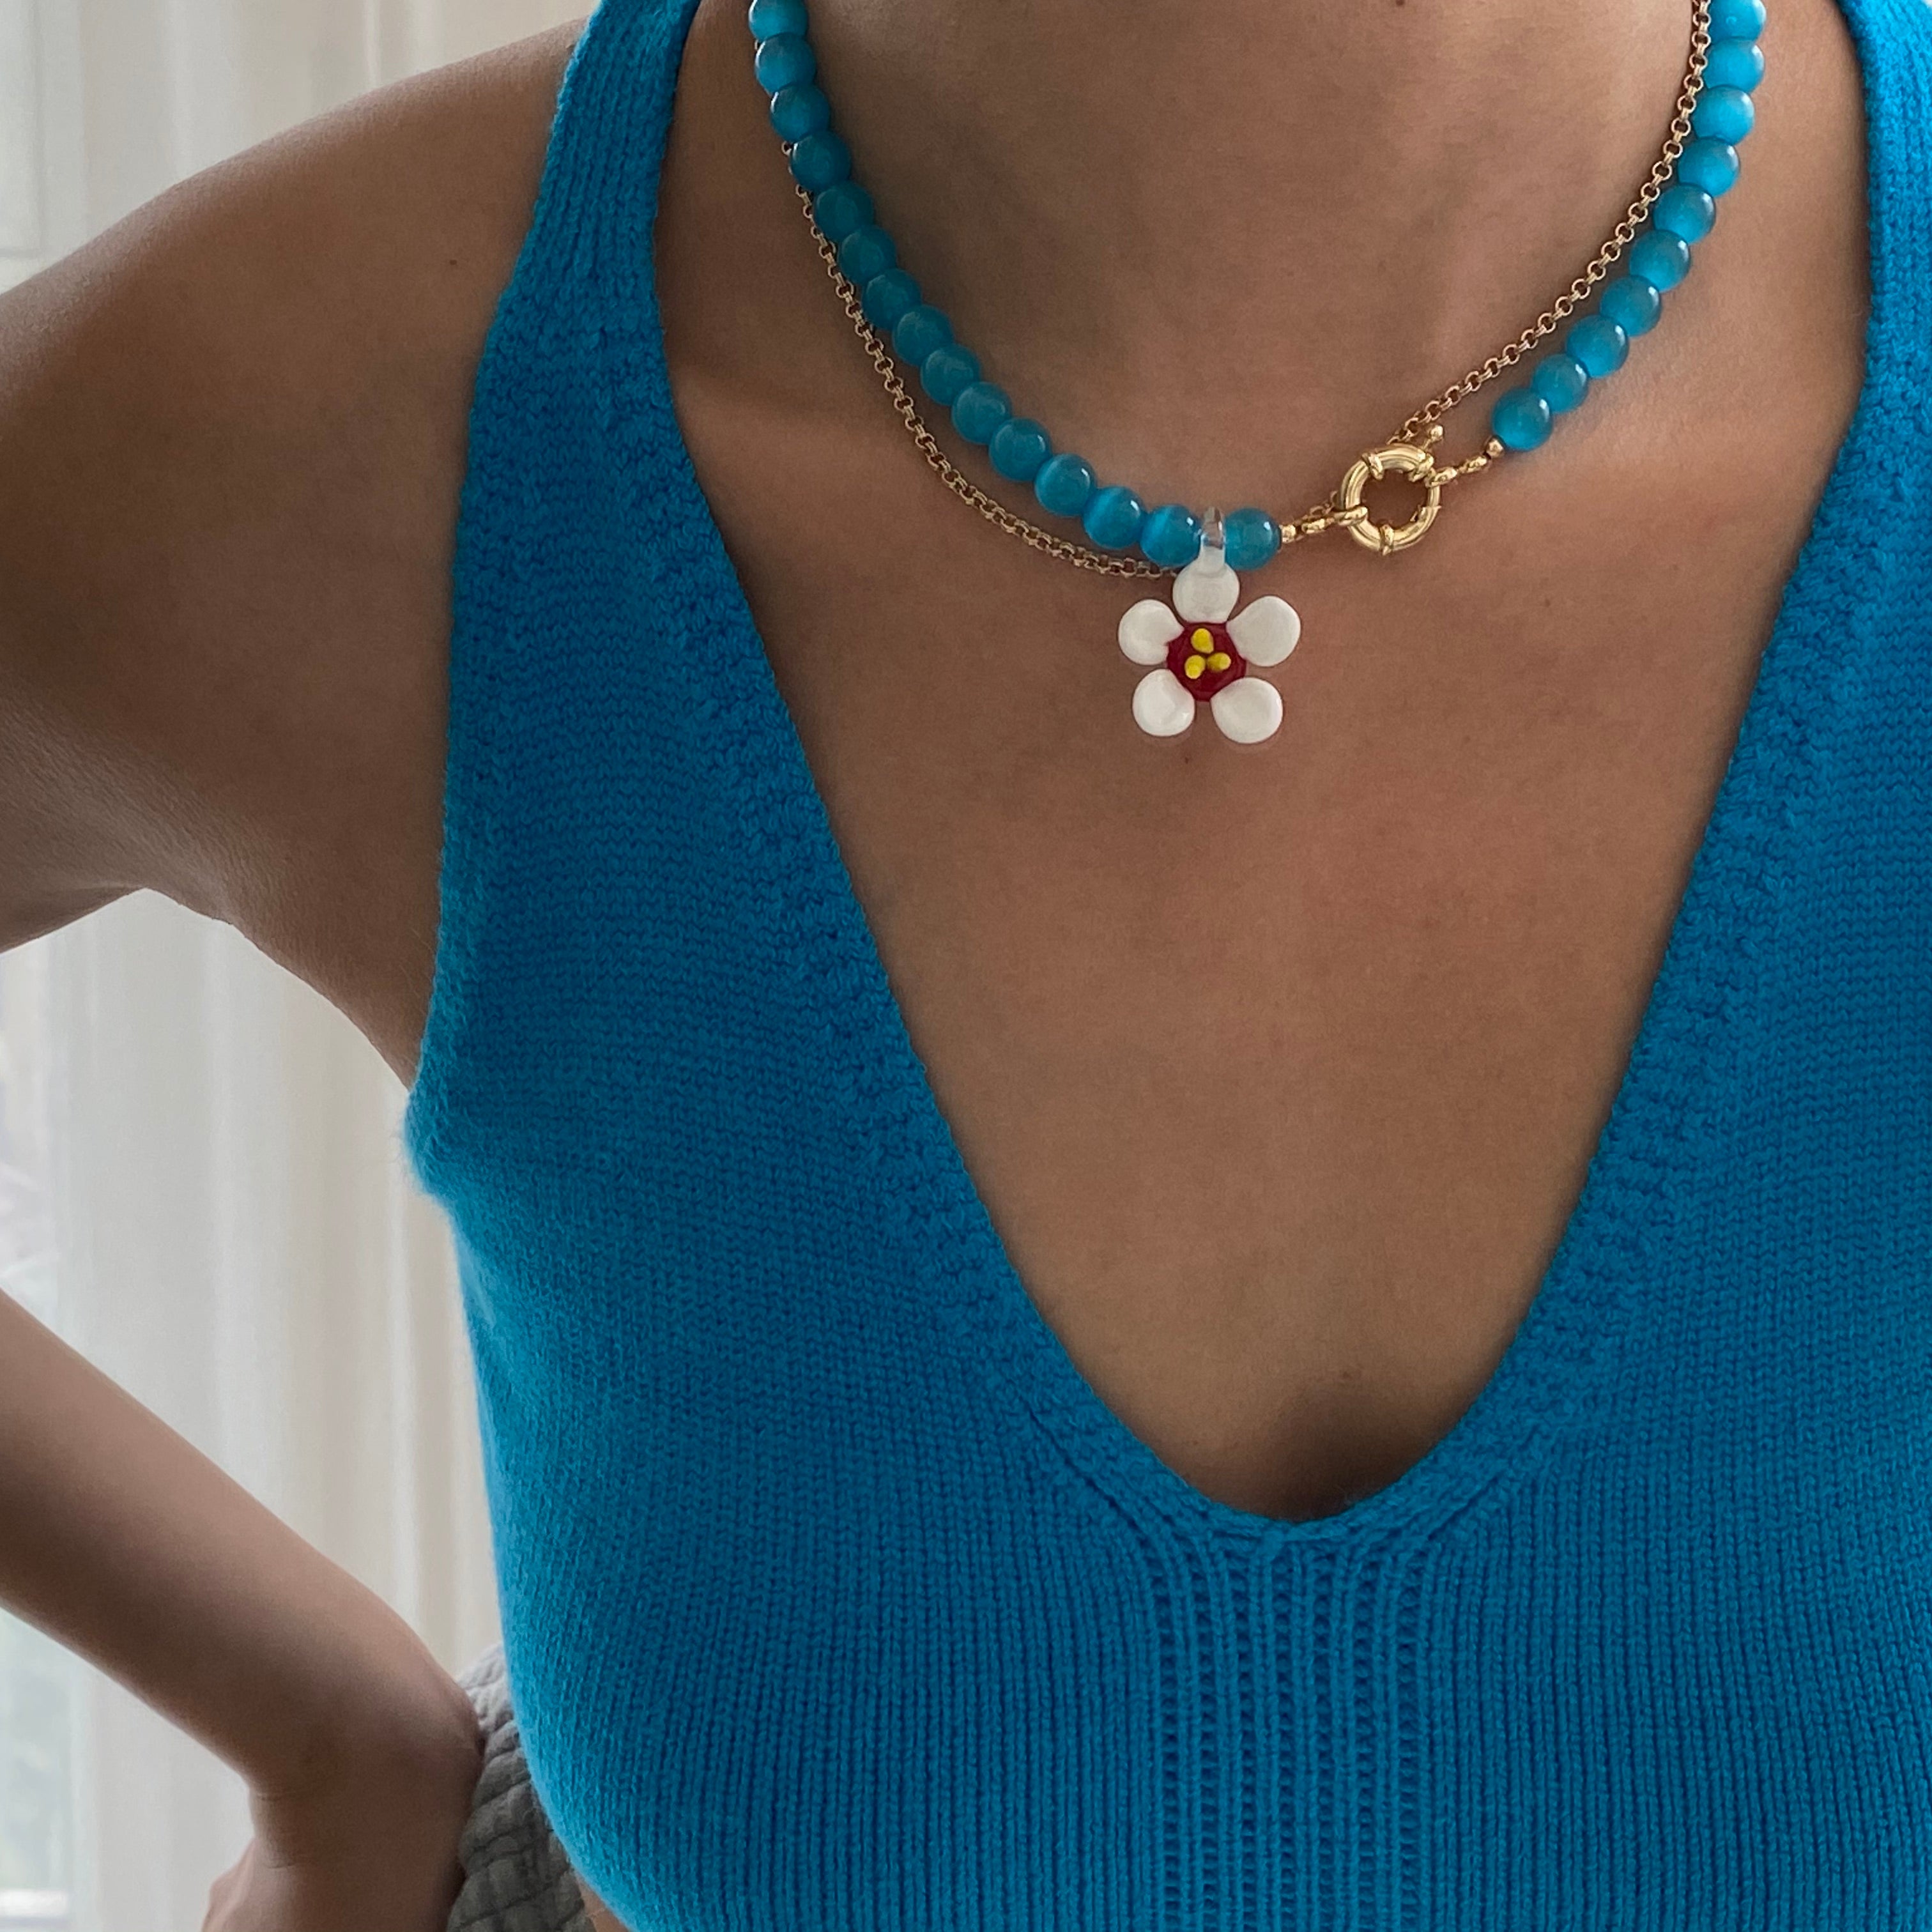 Handmade Glass Colored Flower Necklace